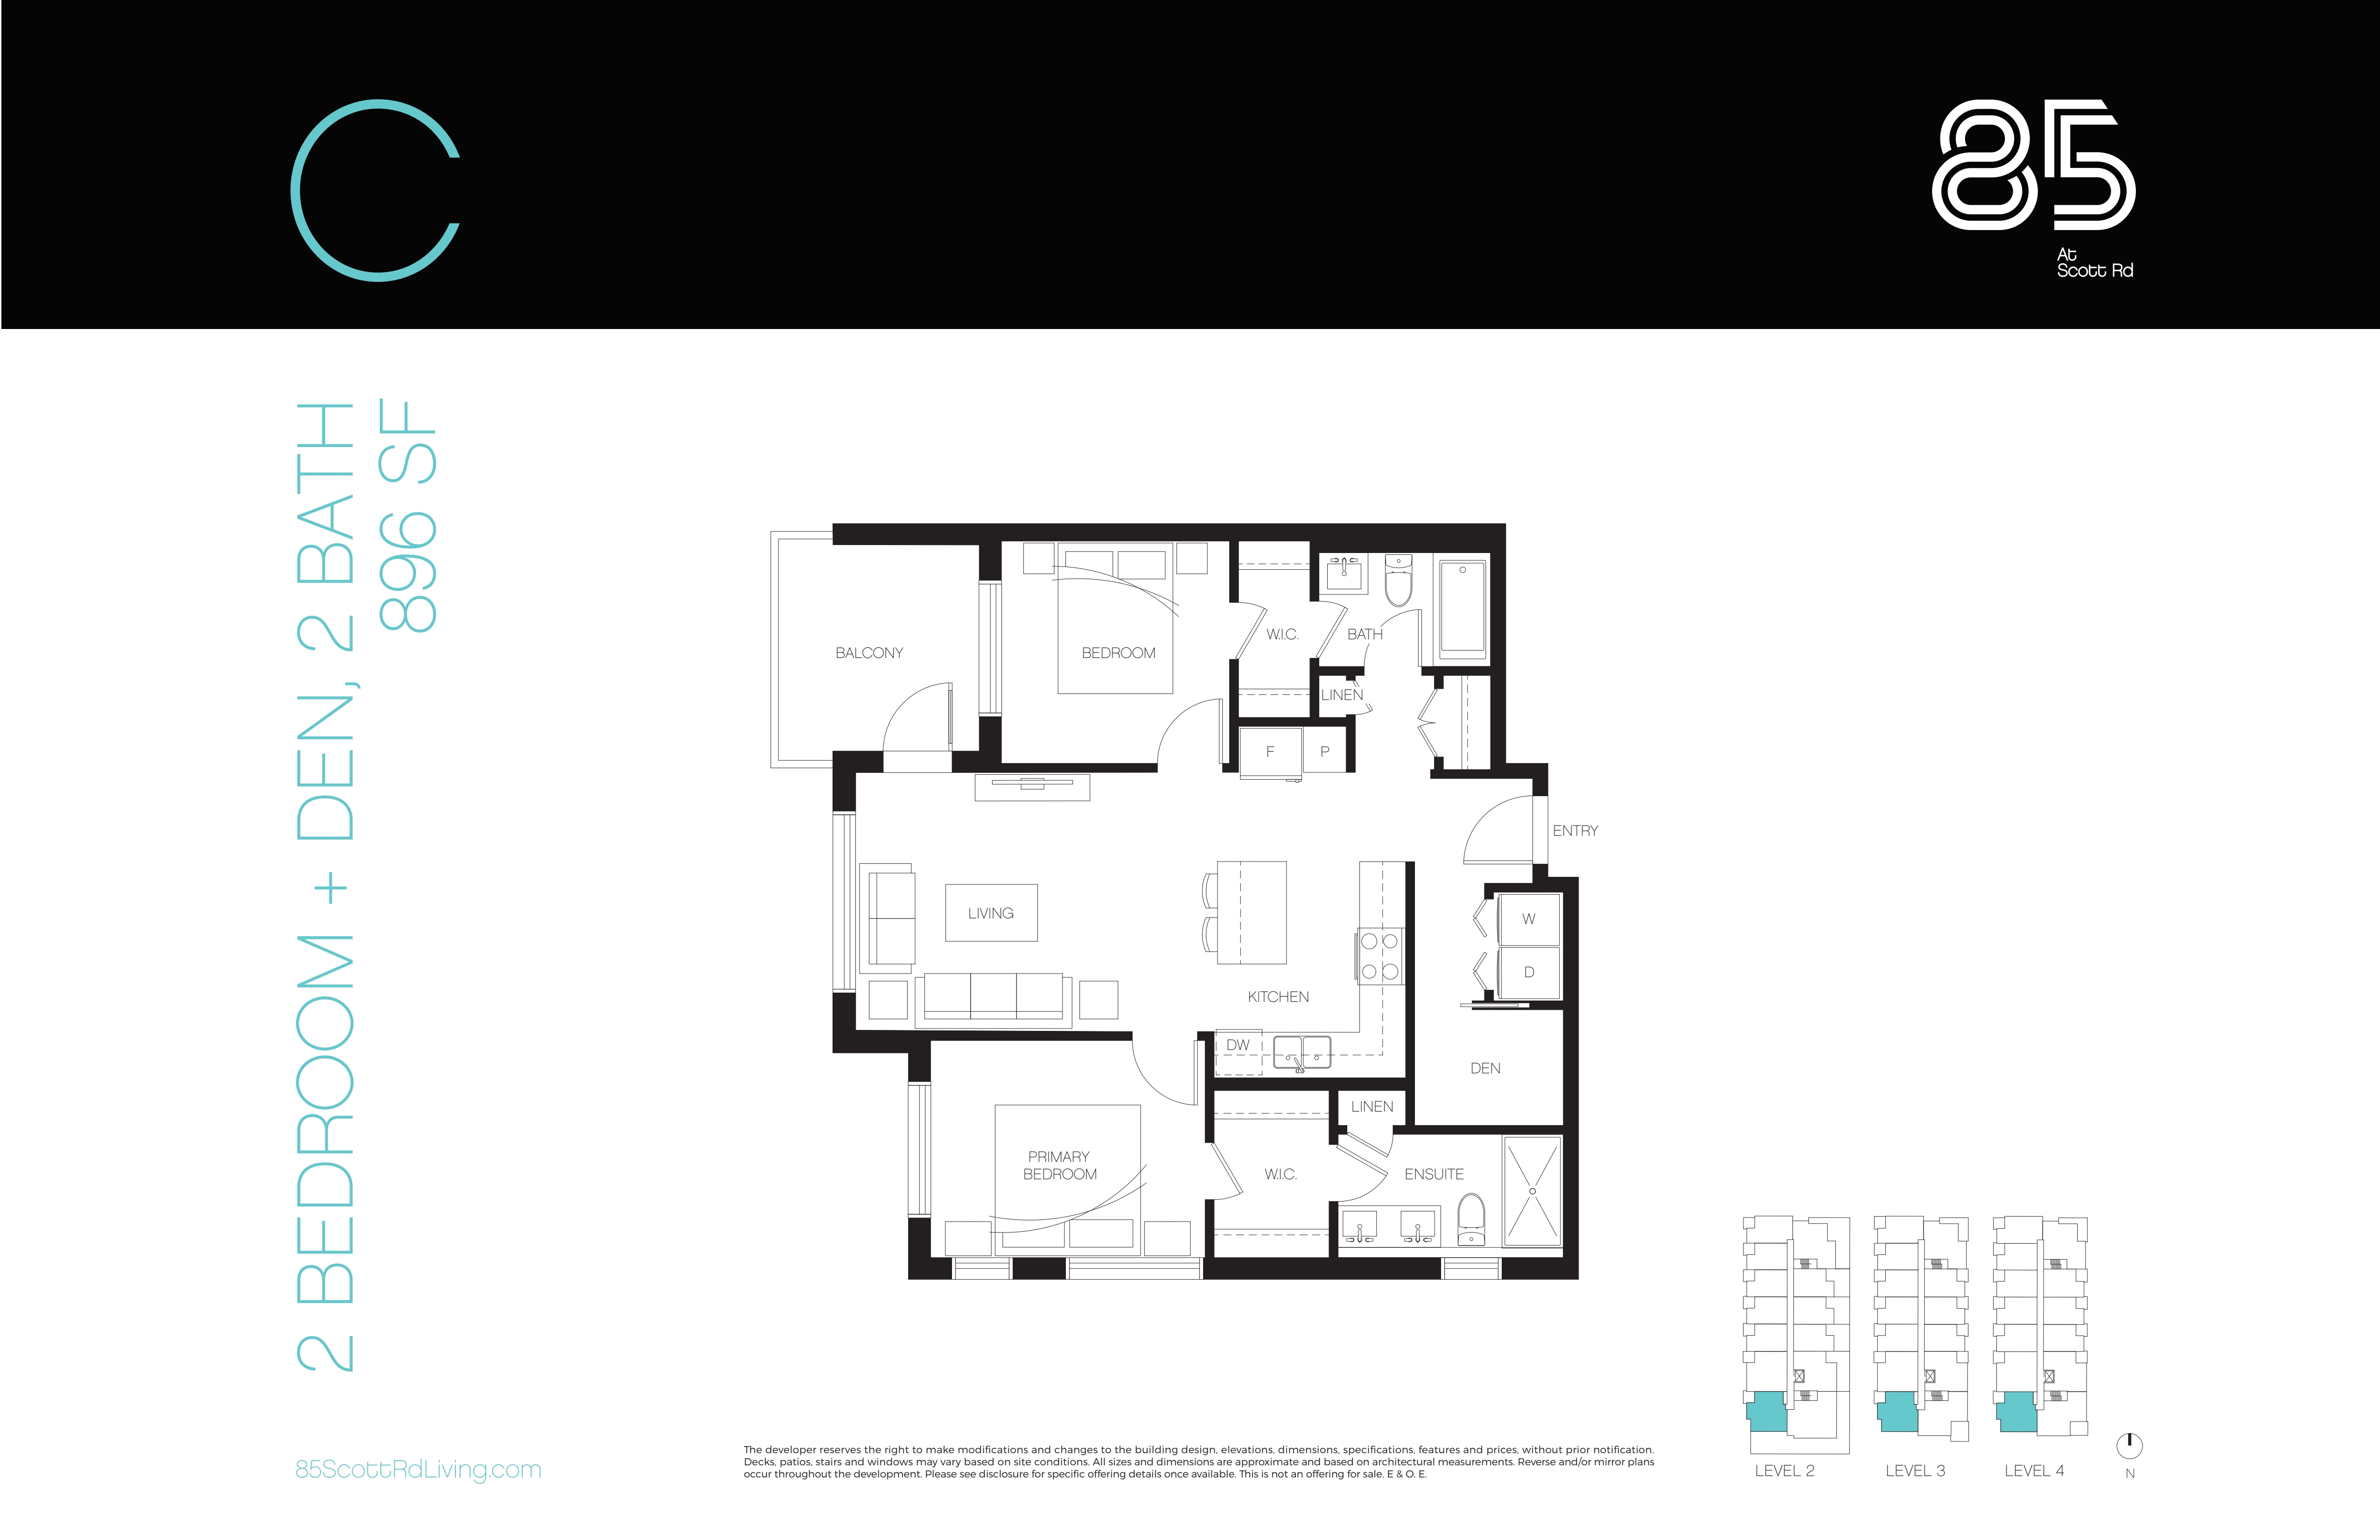 C Floor Plan of The 85 Condos with undefined beds